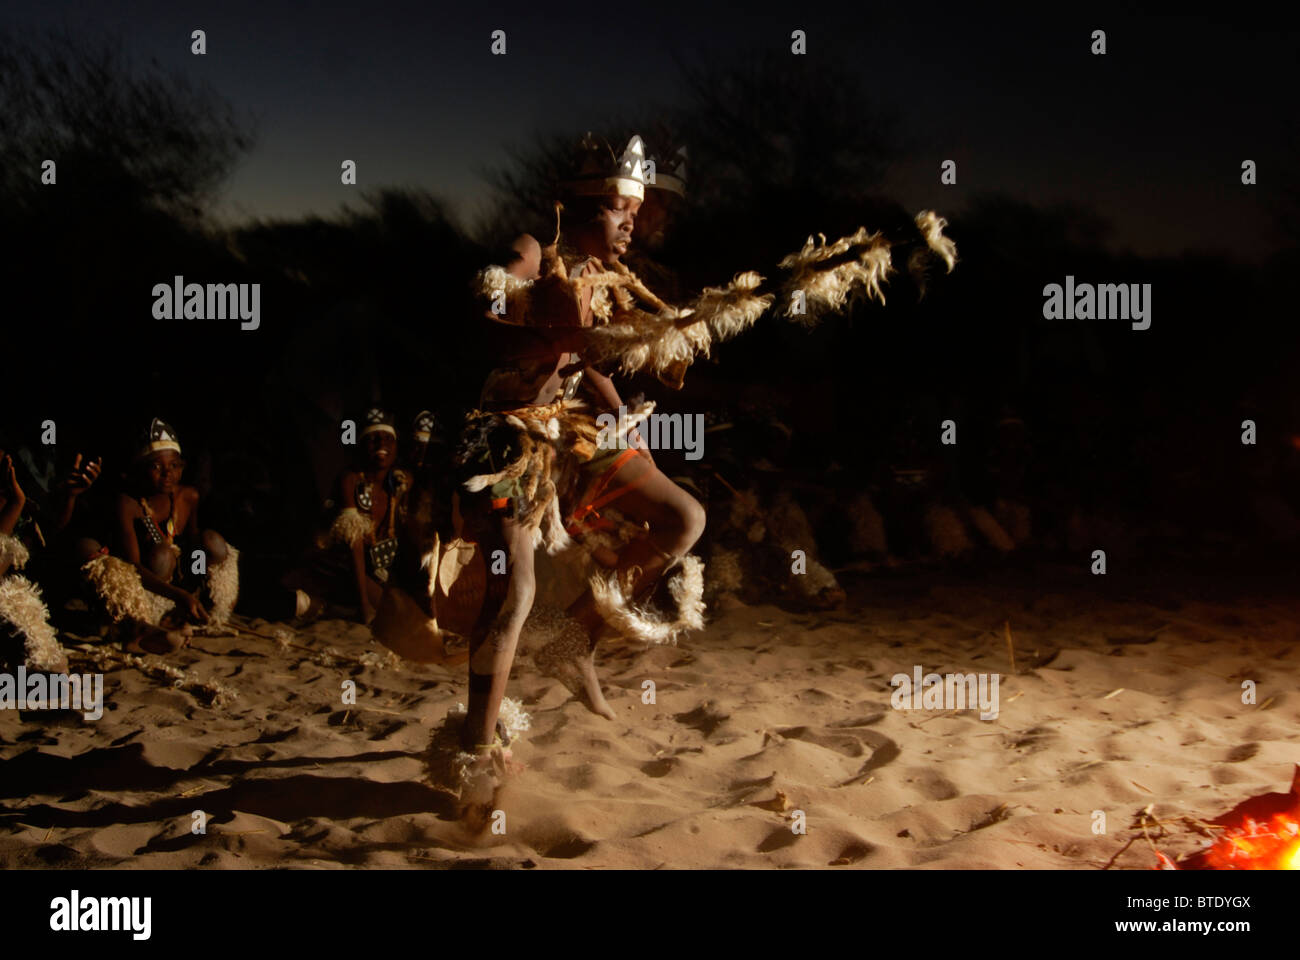 Young Zulu boy dancing around the fire in front of a row of seated boys Stock Photo